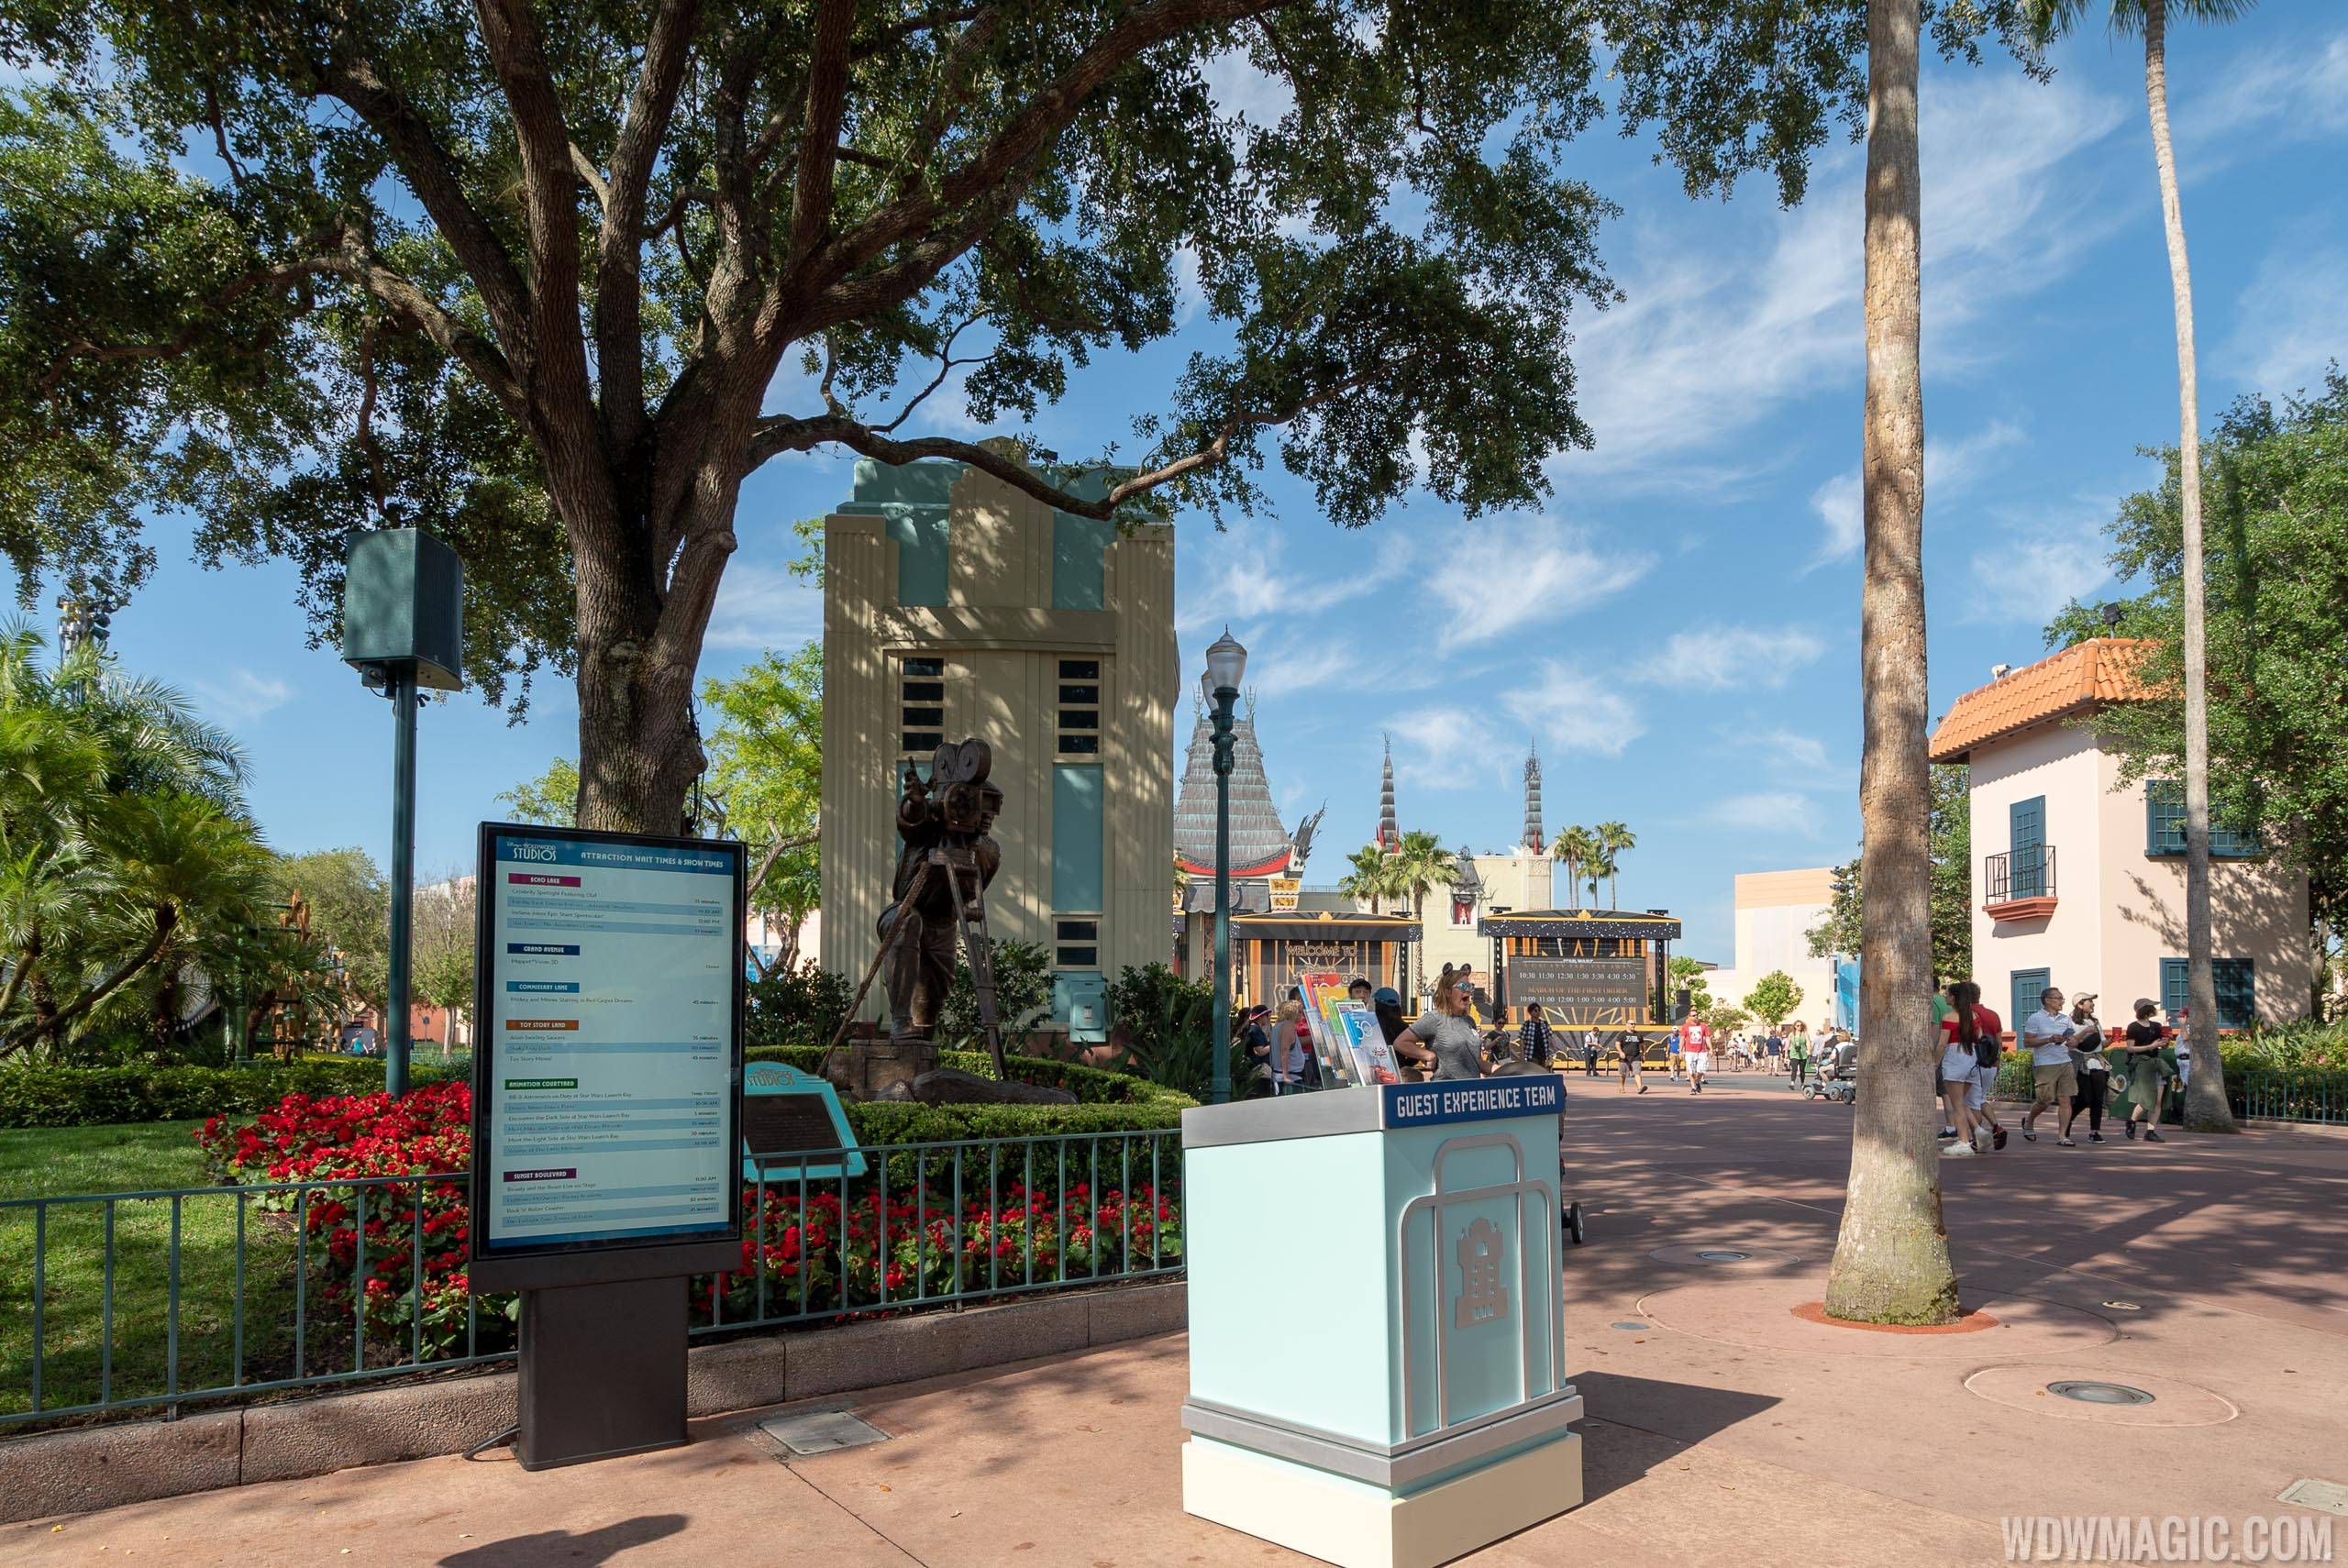 PHOTOS - Guest Experience Team expands to Disney's Hollywood Studios